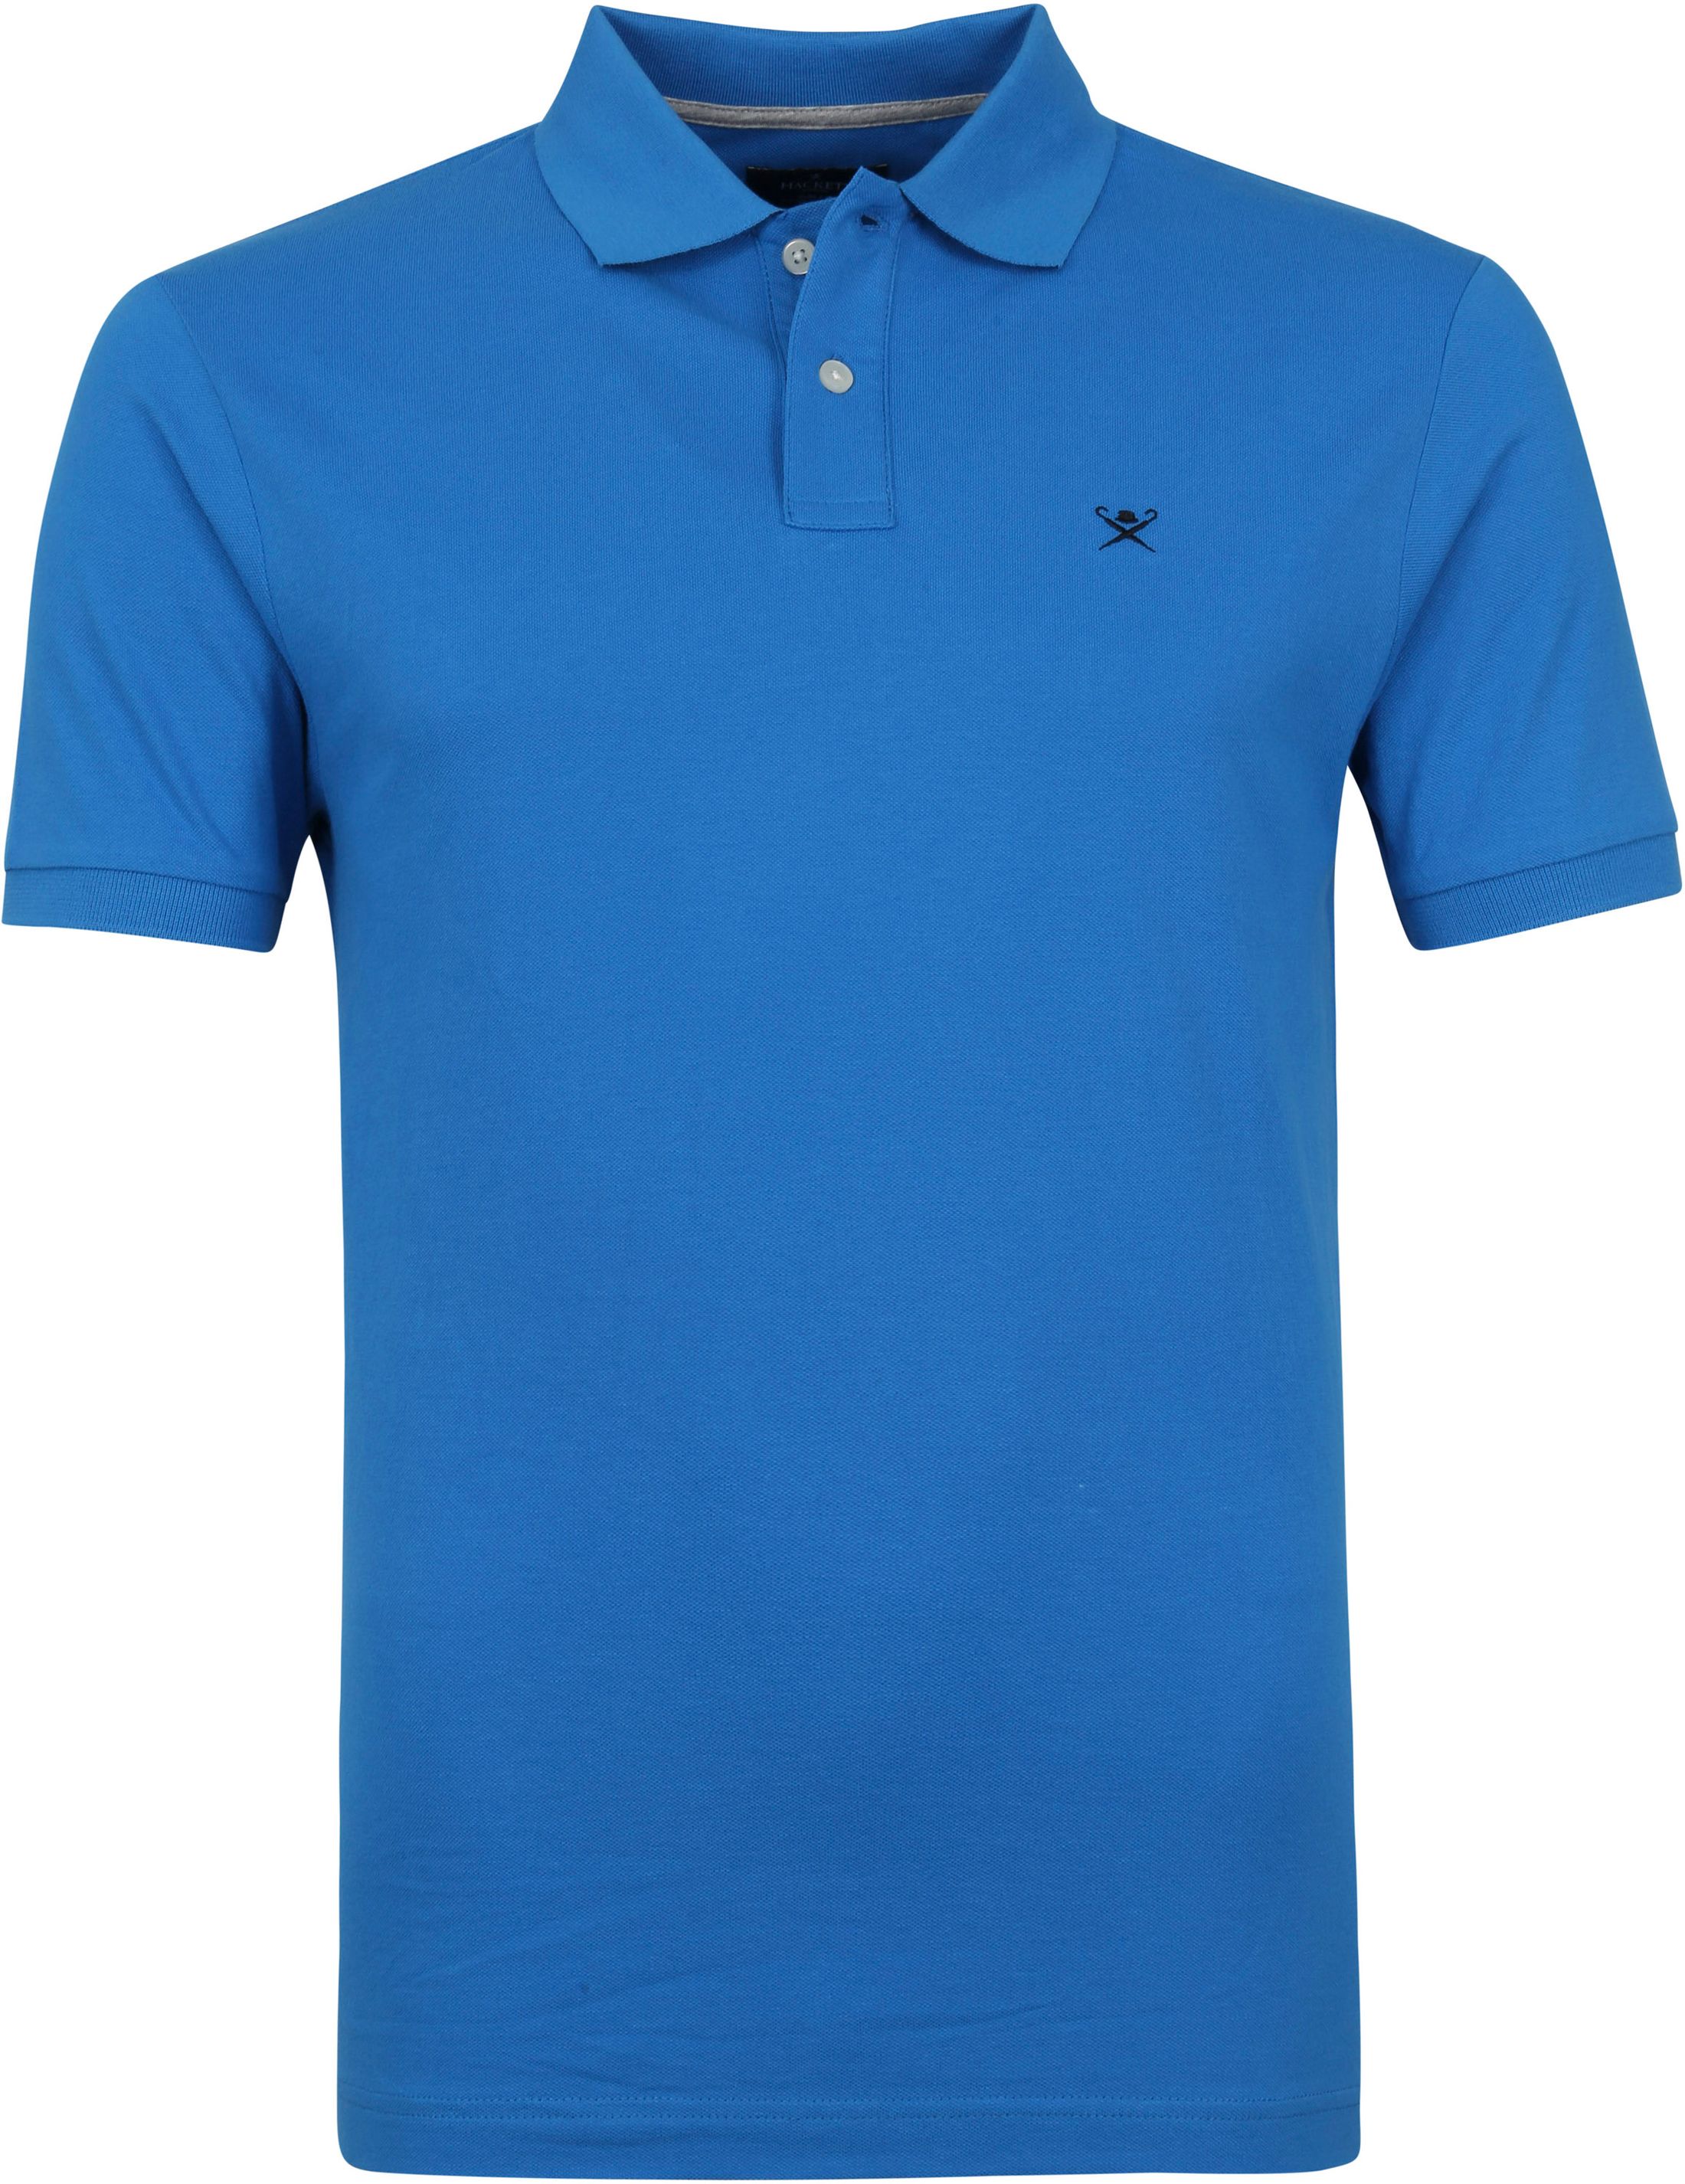 Hackett Polo Shirt French Blue size L